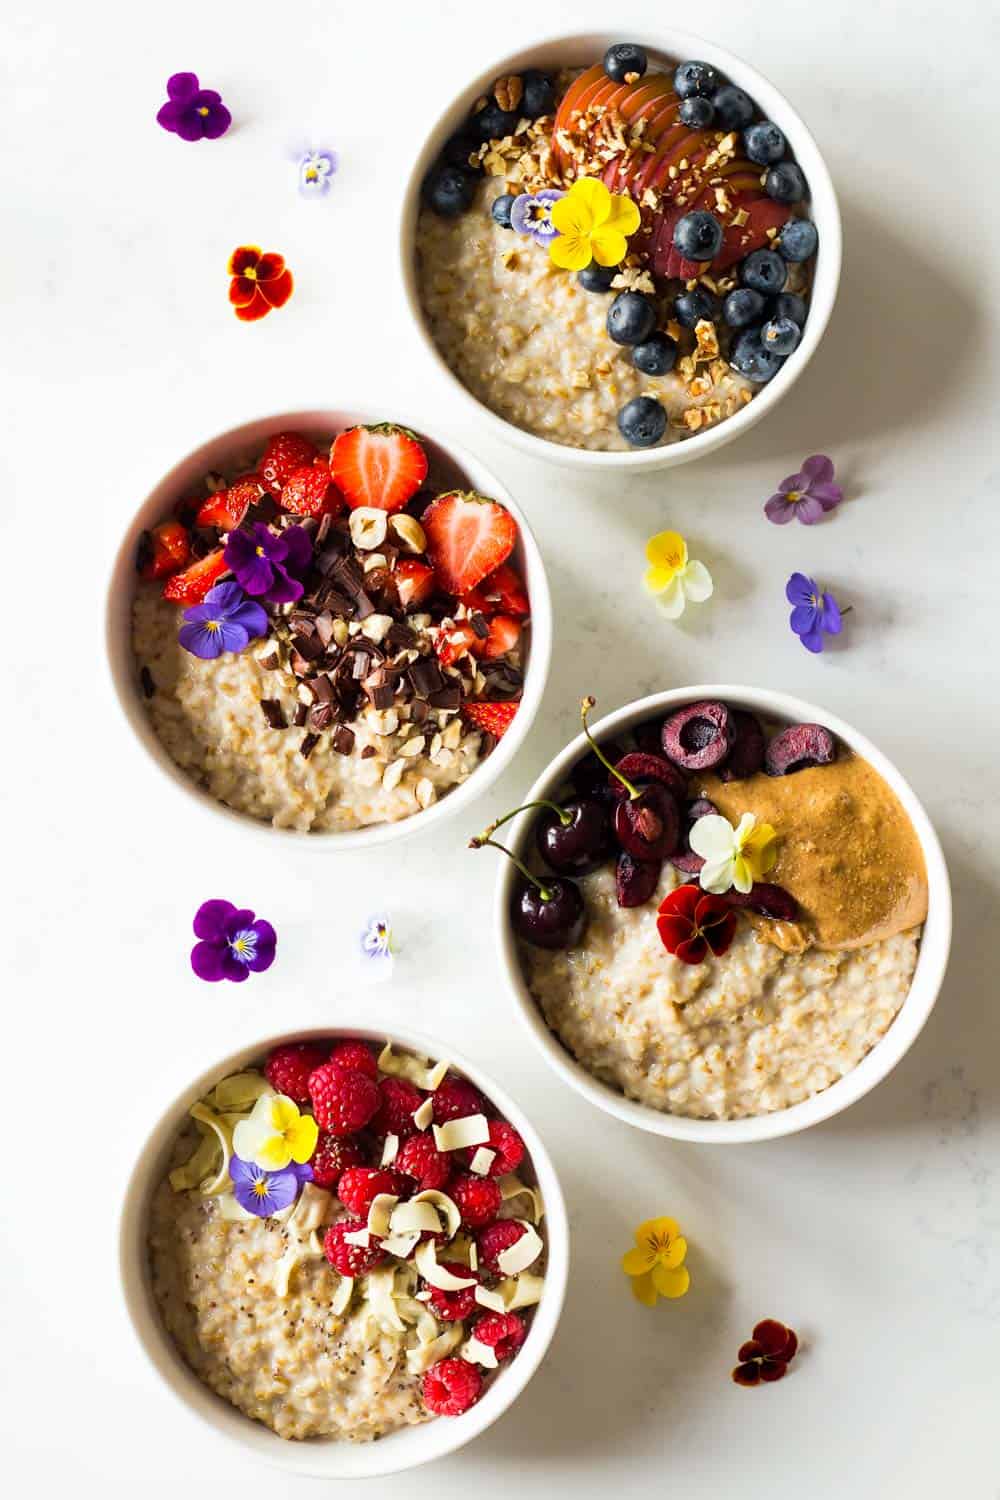 Four Instant Pot Steel Cut Oats bowls with different toppings, garnished with fresh flowers.